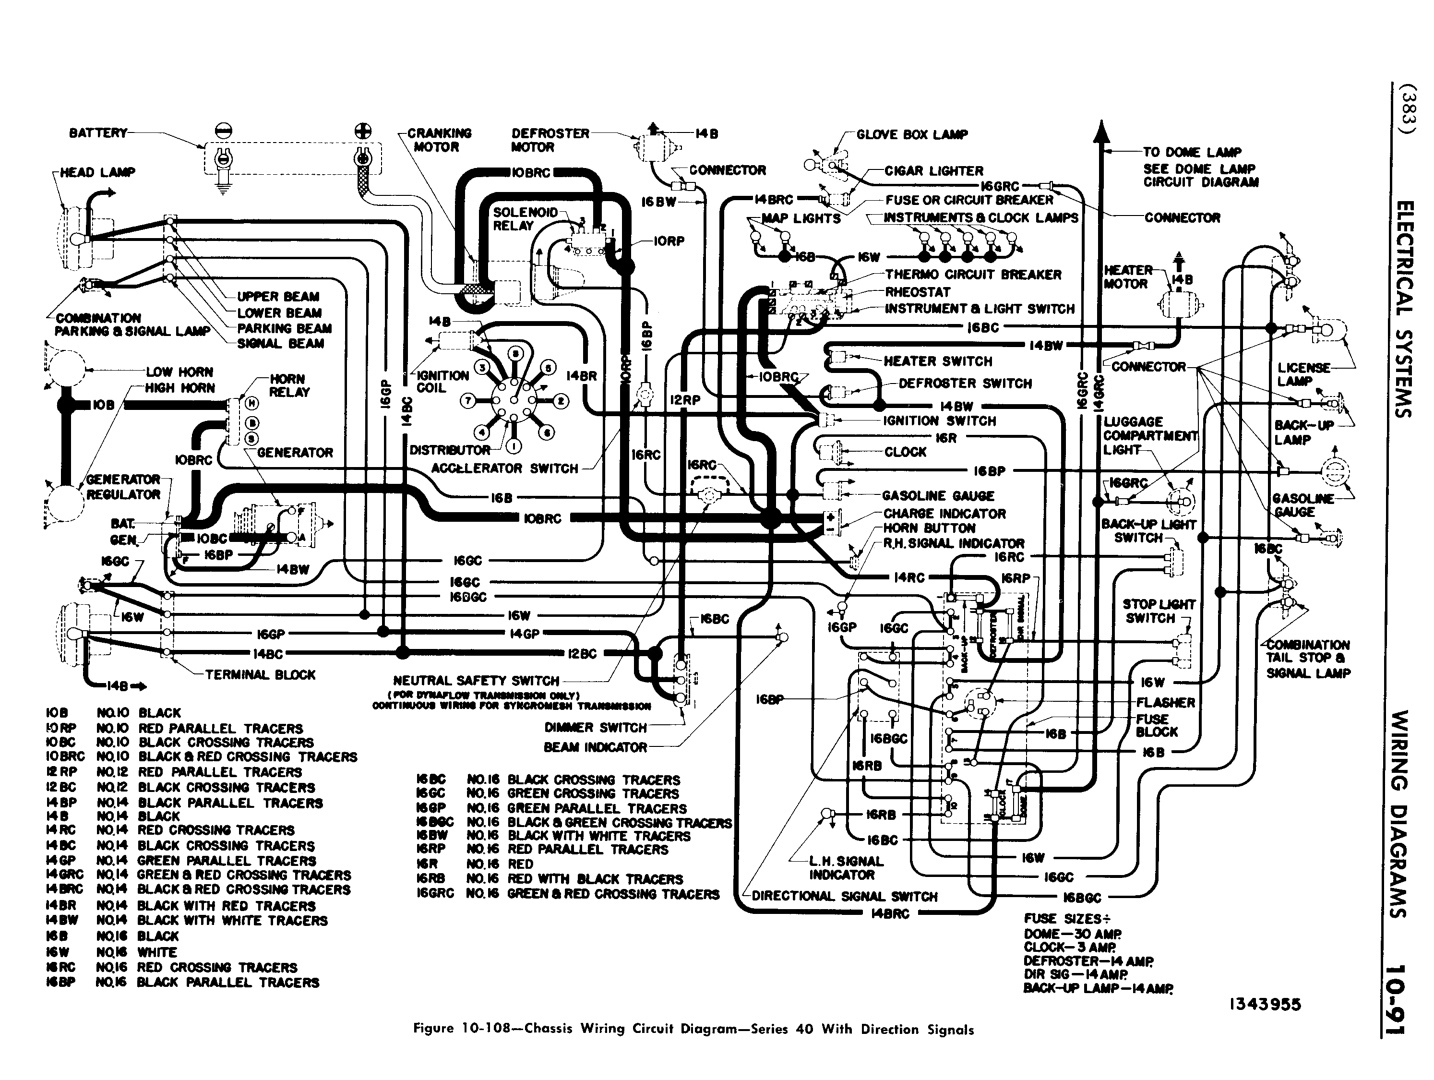 n_11 1951 Buick Shop Manual - Electrical Systems-091-091.jpg